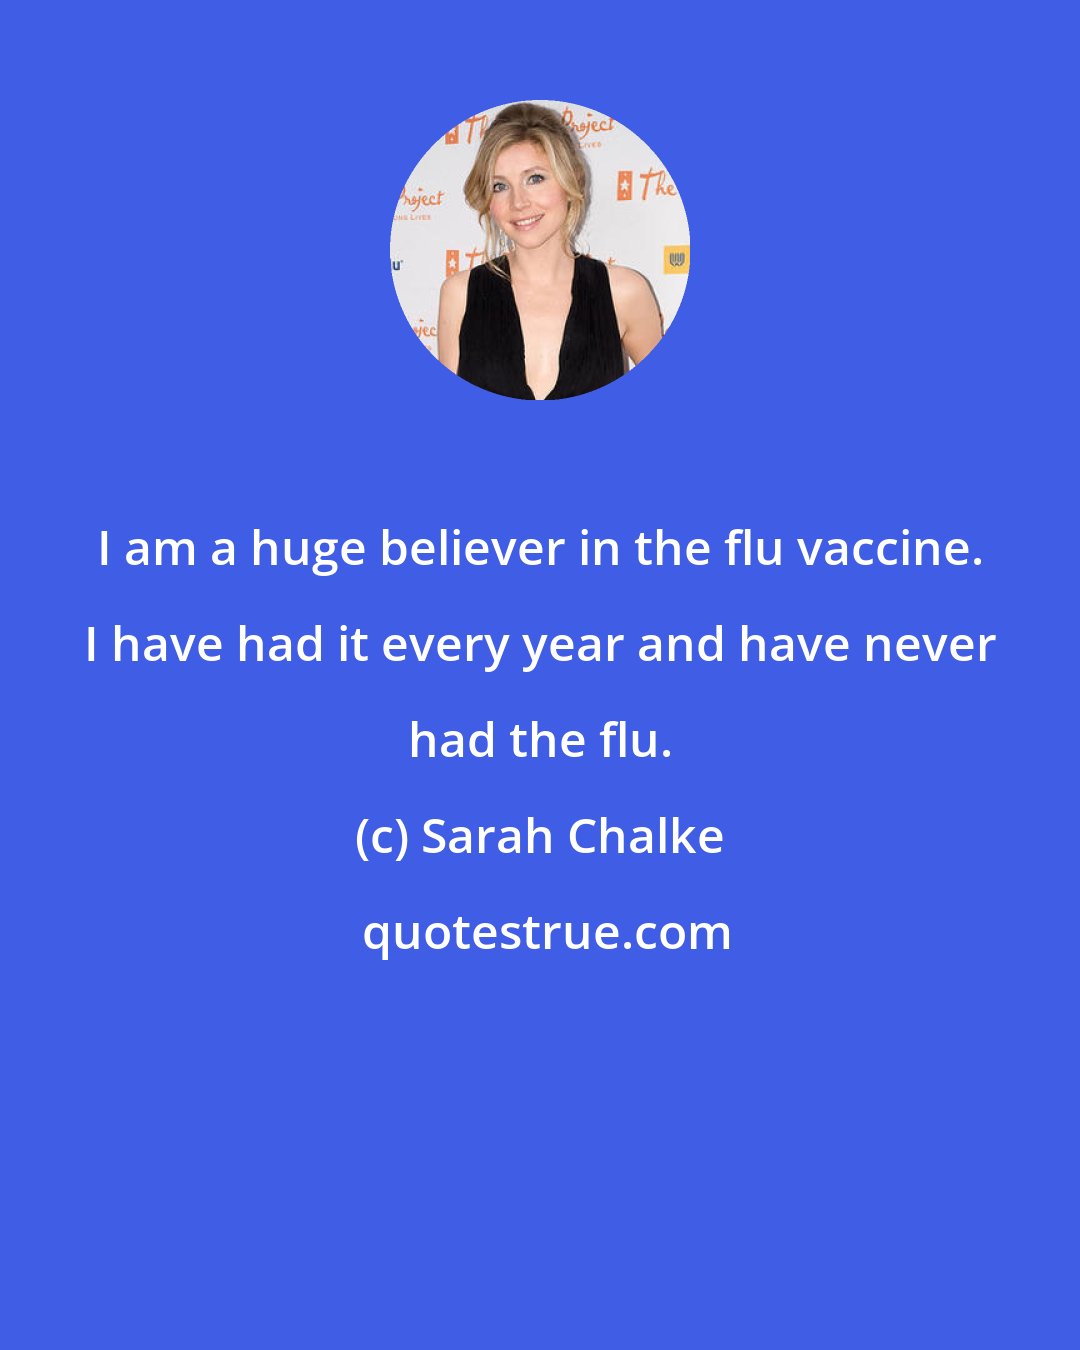 Sarah Chalke: I am a huge believer in the flu vaccine. I have had it every year and have never had the flu.